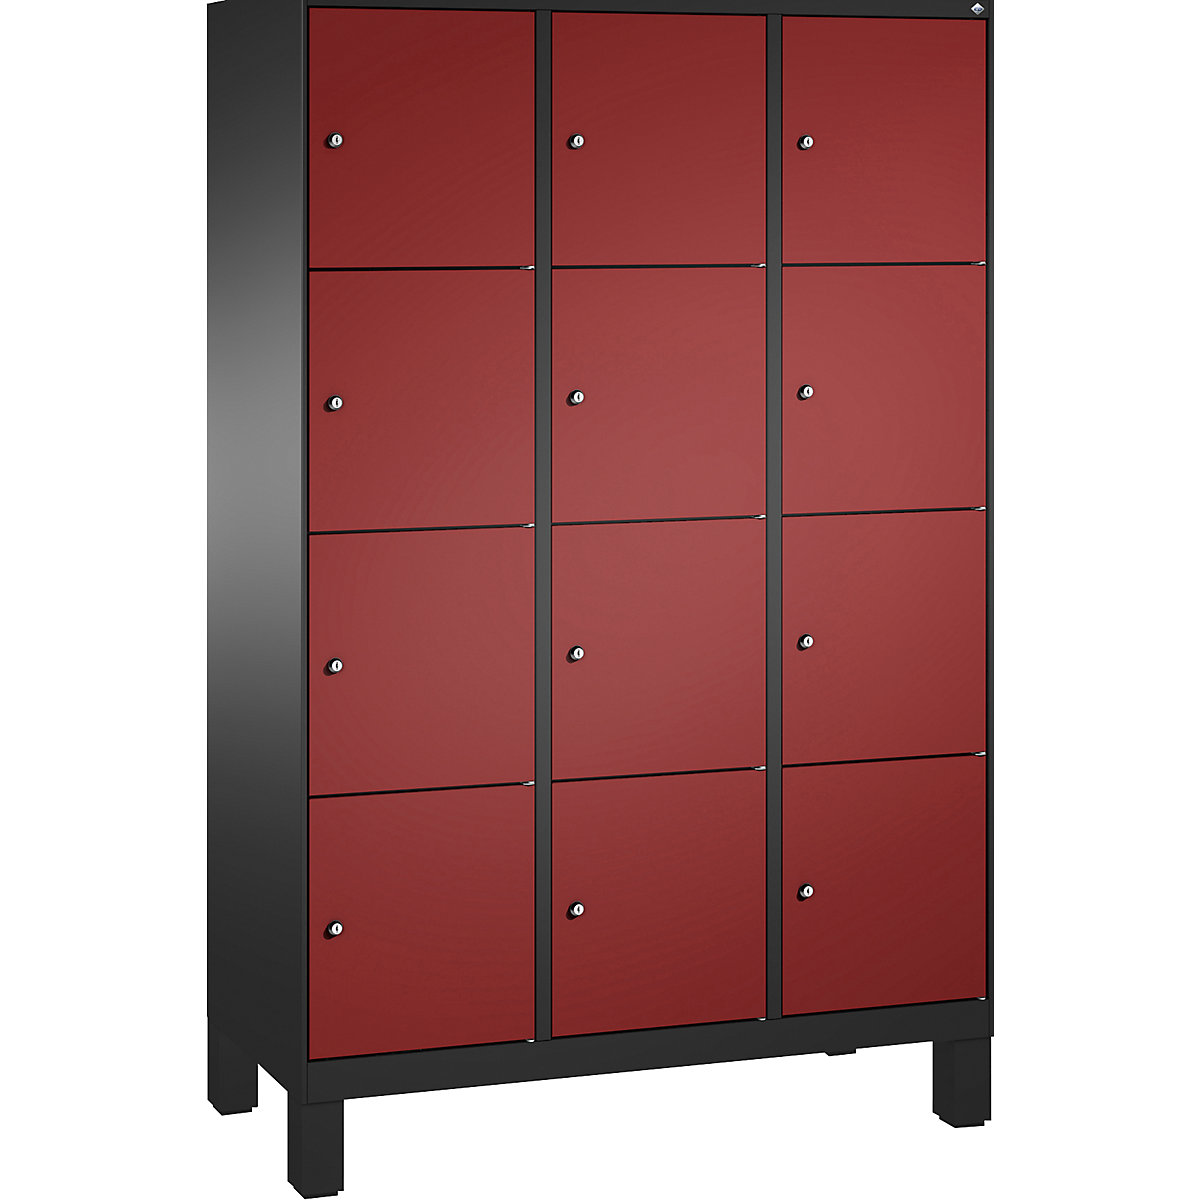 EVOLO locker unit, with feet – C+P, 3 compartments, 4 shelf compartments each, compartment width 400 mm, black grey / ruby red-9